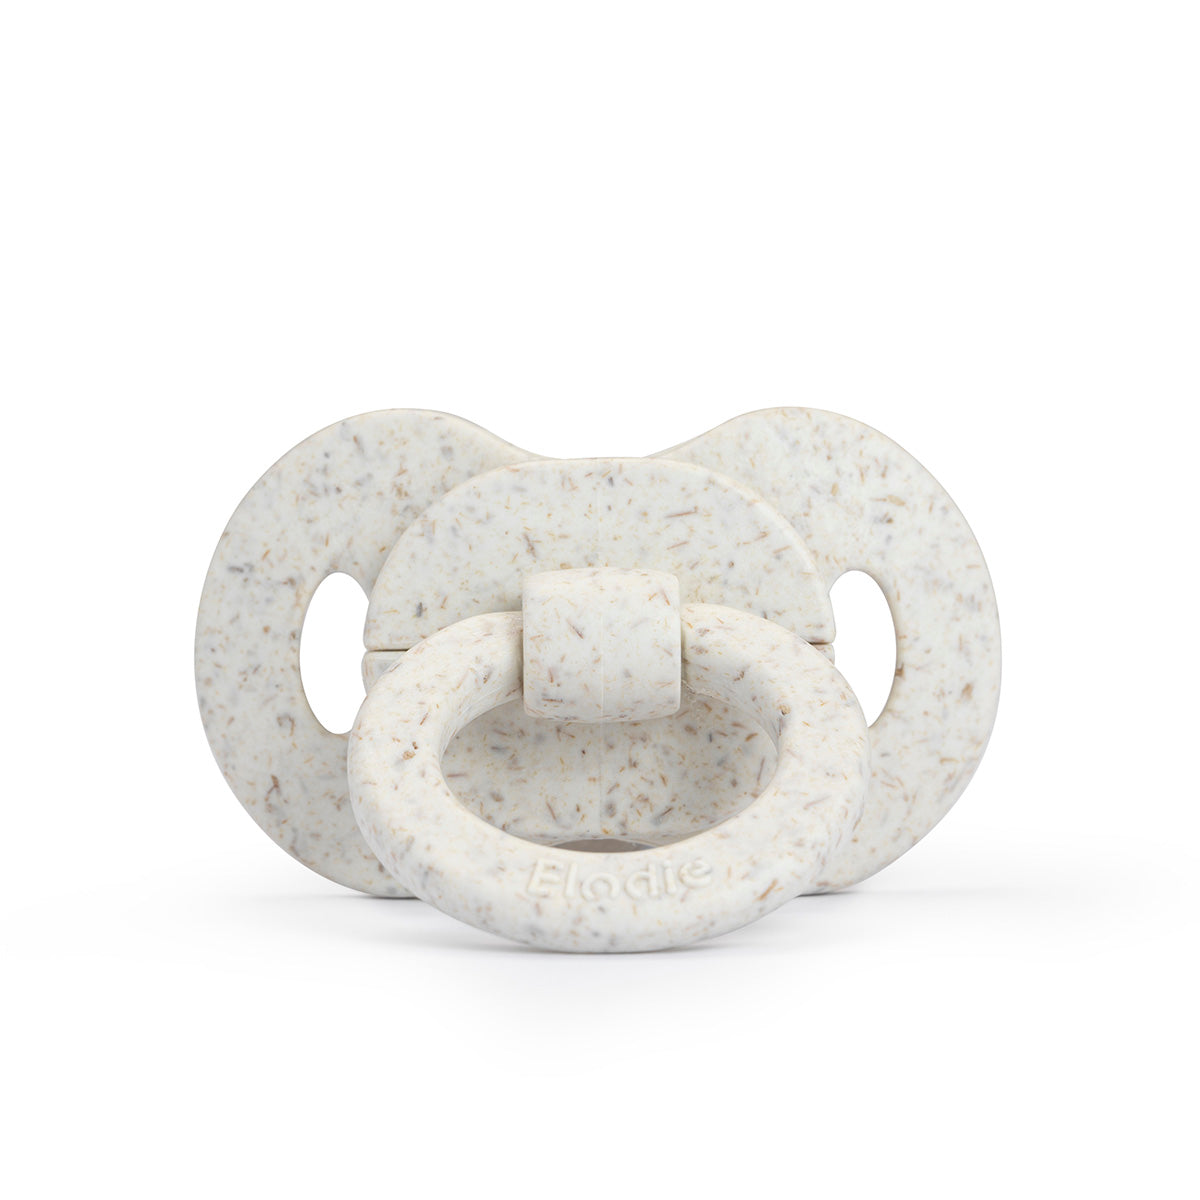 Bamboo Pacifier Natural Rubber 0-6 months - Vanilla White